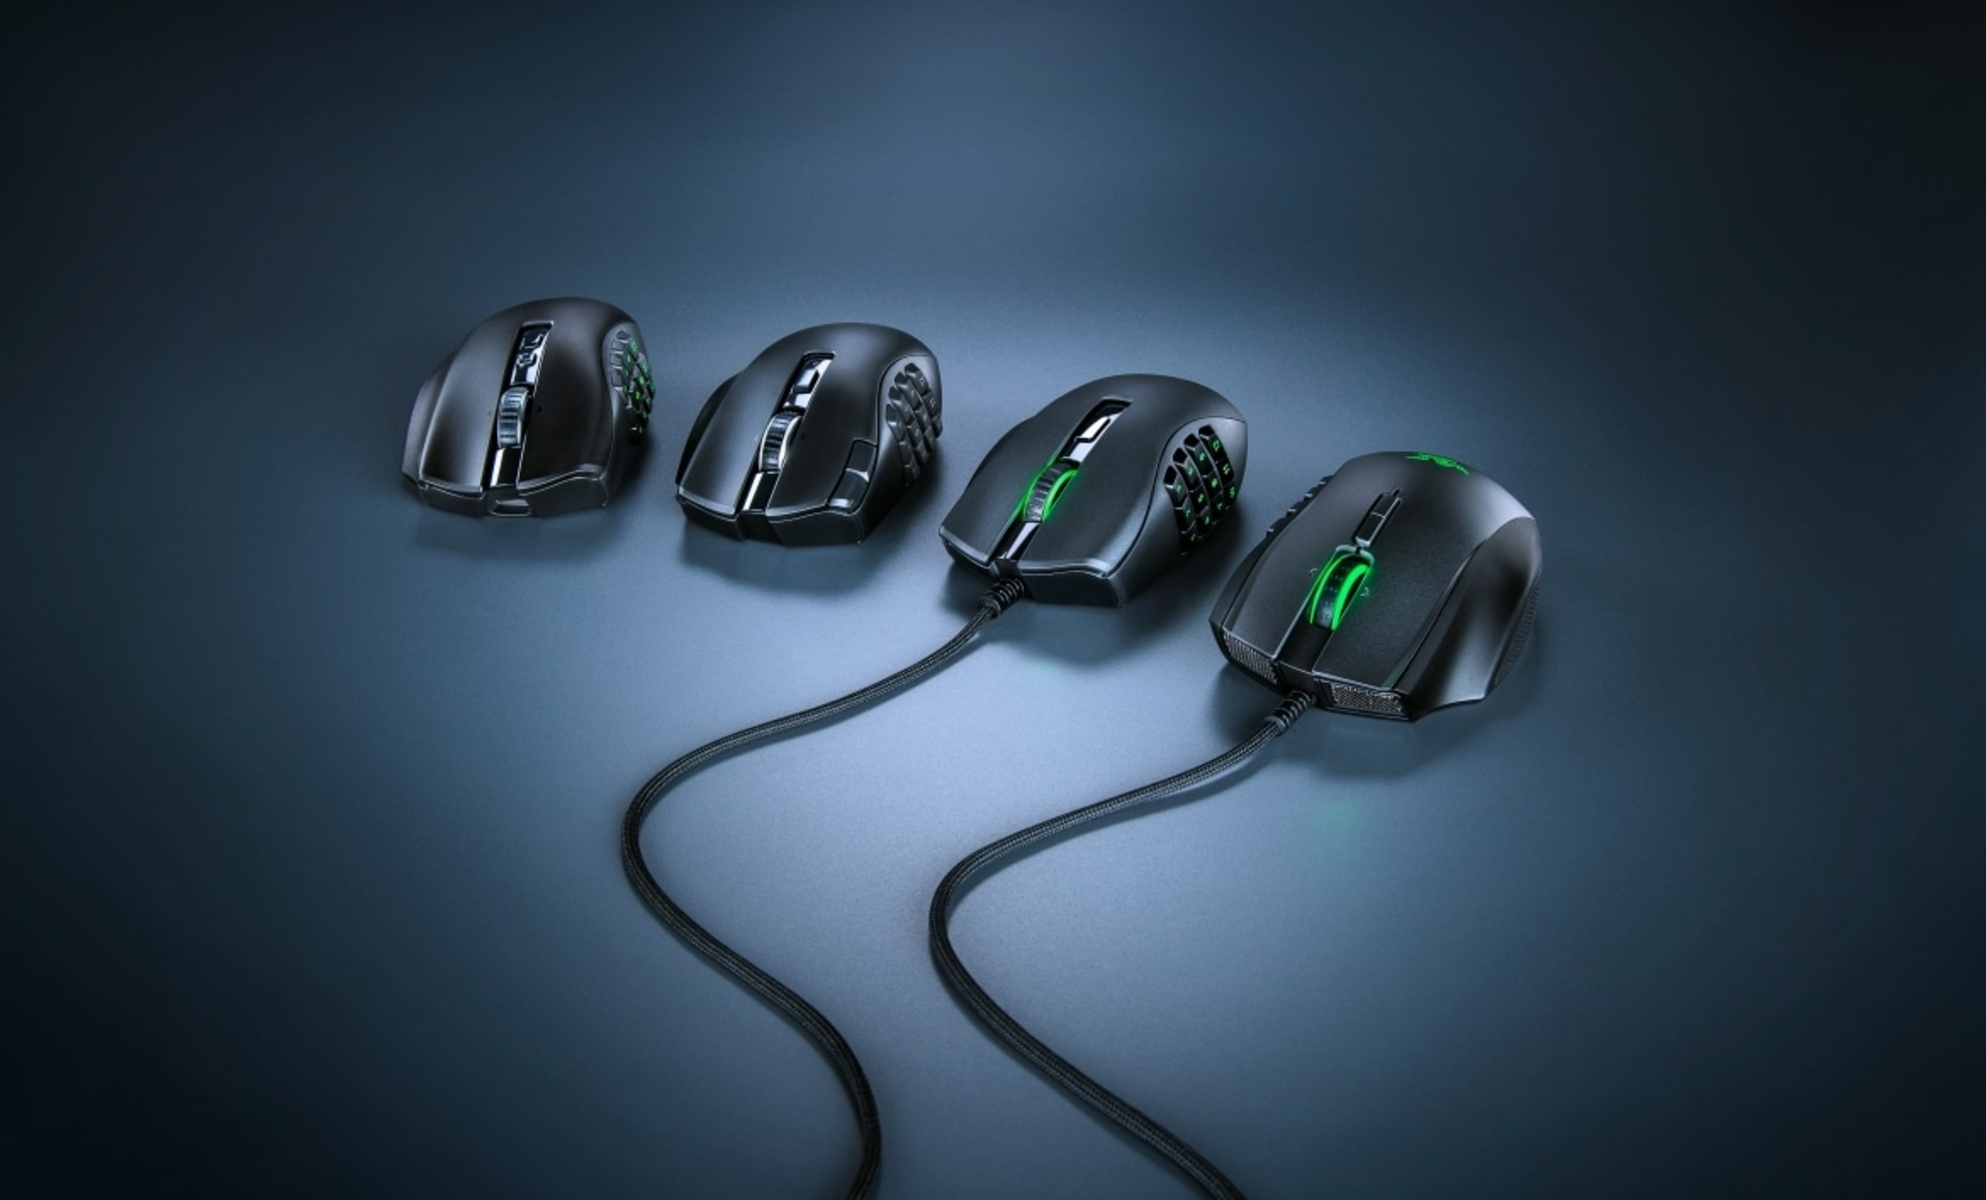 Razer Naga Epic Chroma MMO Gaming Mouse: How To Set Back And Forward Buttons?